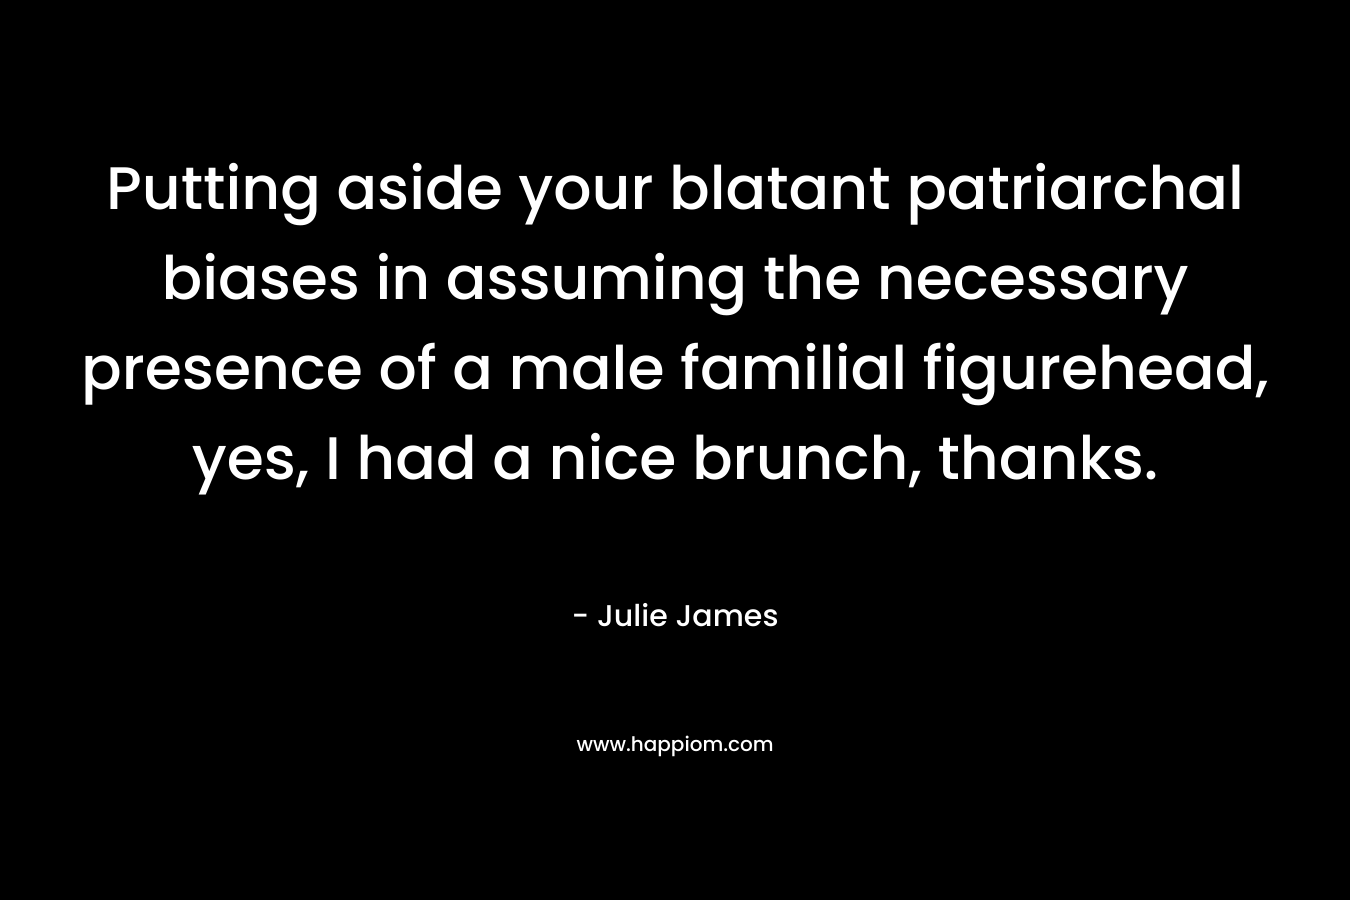 Putting aside your blatant patriarchal biases in assuming the necessary presence of a male familial figurehead, yes, I had a nice brunch, thanks. – Julie James